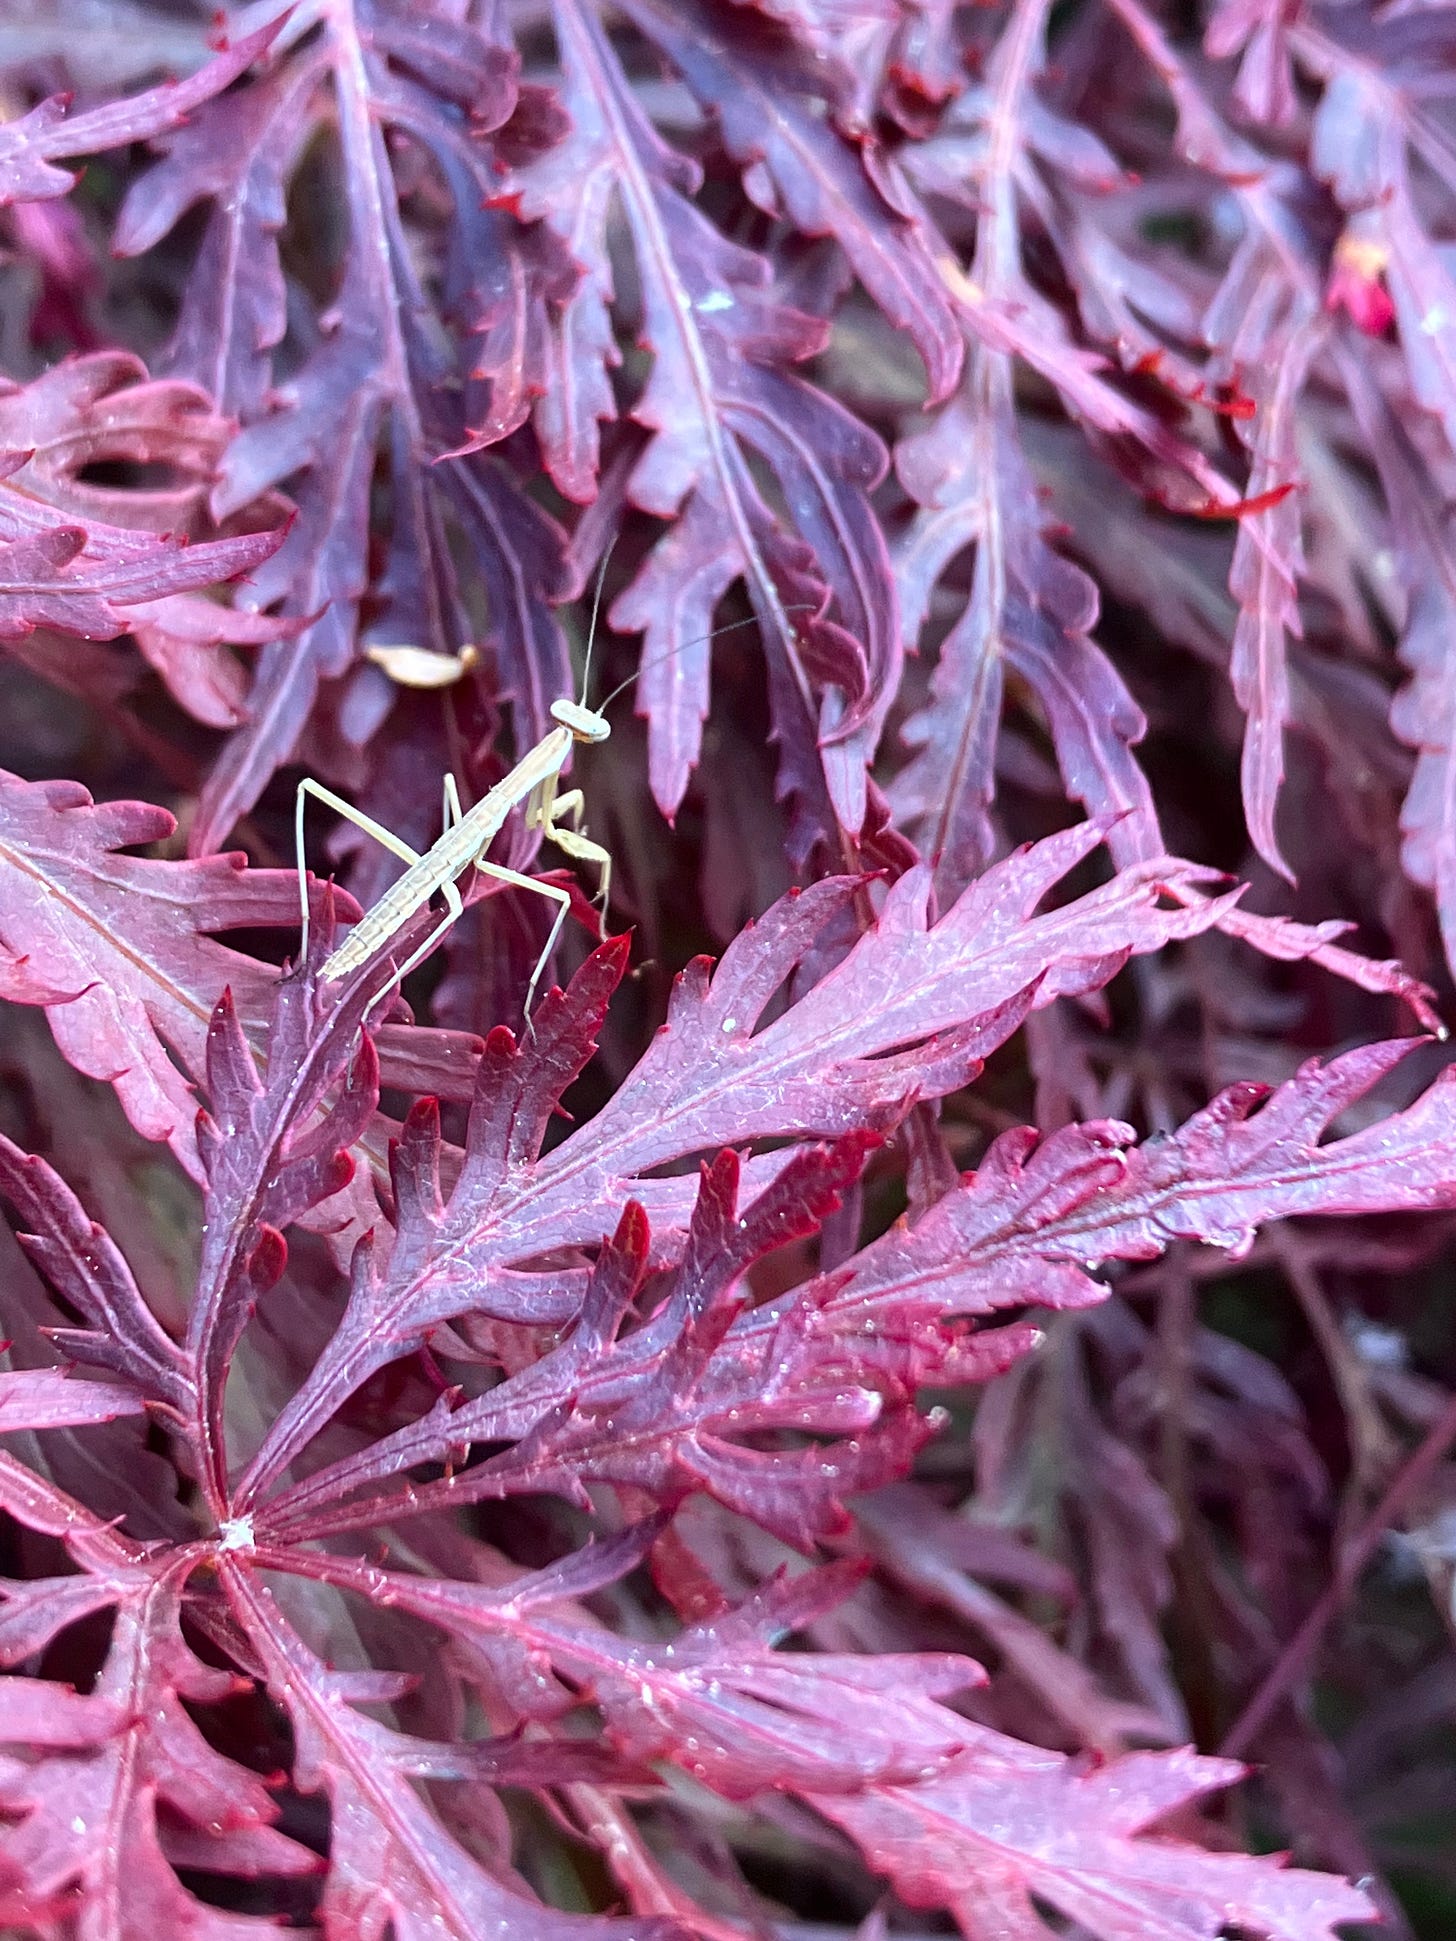 A close up of a preying mantis crawling on a Japense red maple tree